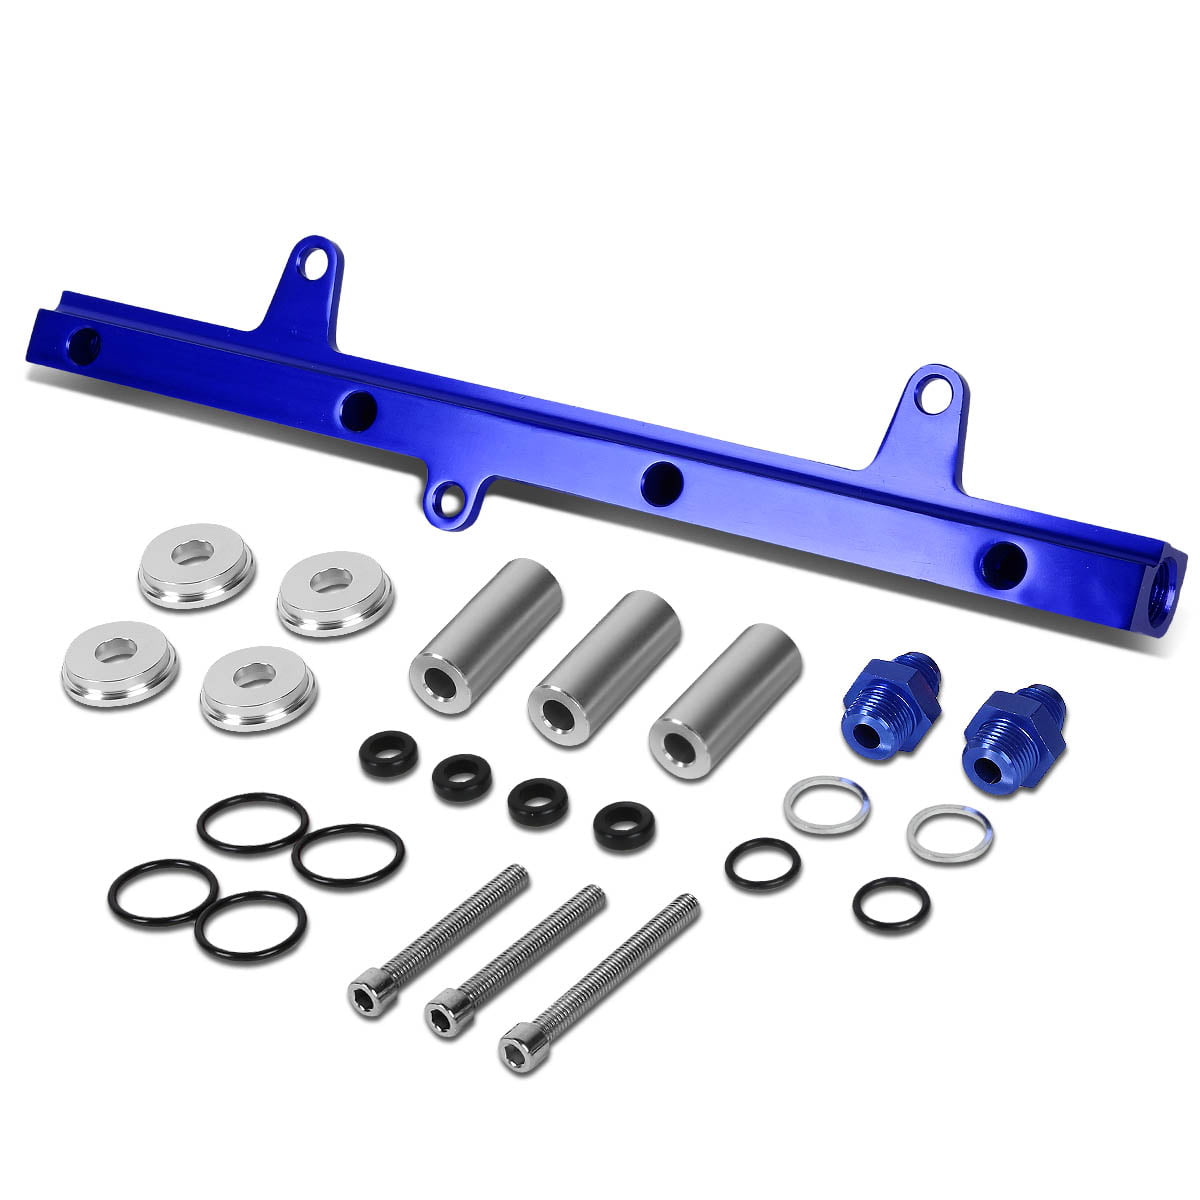 For Nissan 240SX Top Feed High Flow Fuel Injector Rail Kit S13 SR20DET Blue 